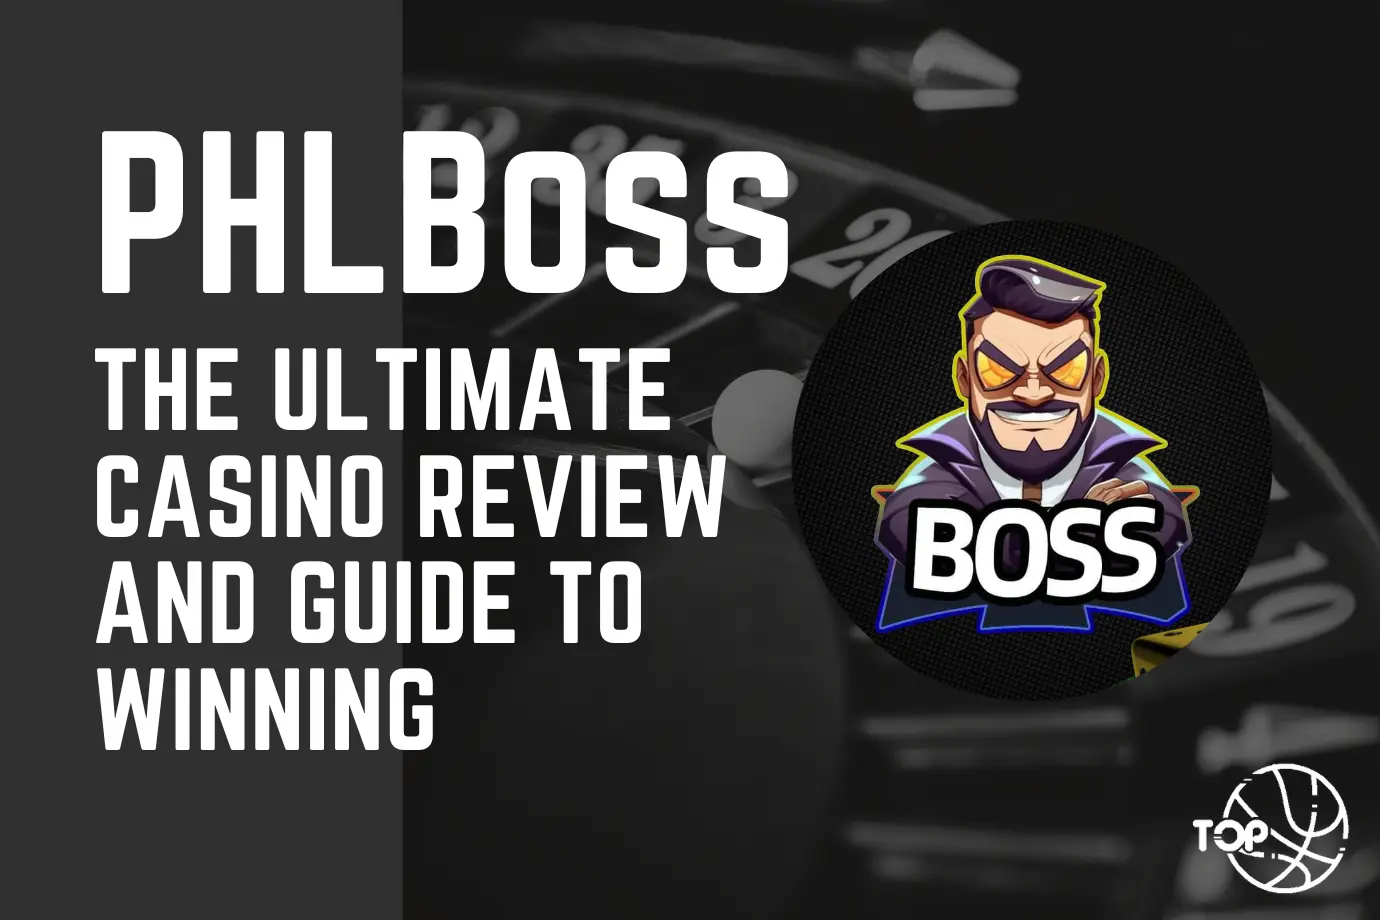 PHLBoss: The Ultimate Casino Review and Guide to Winning